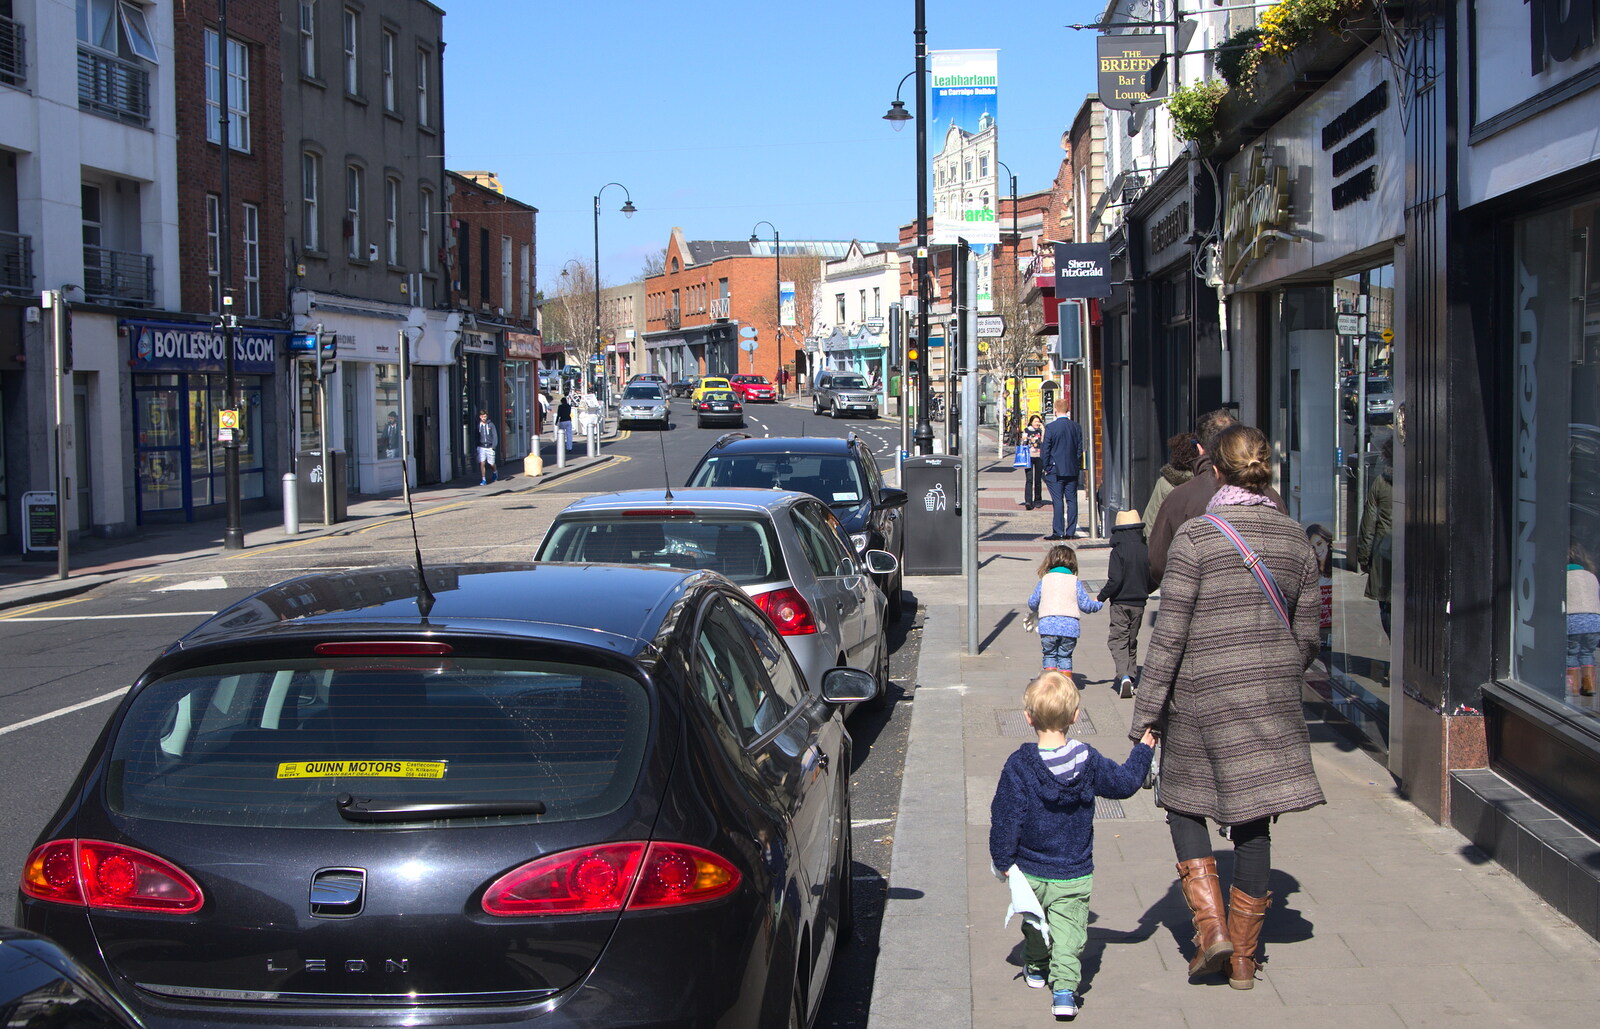 Blackrock High Street from Temple Bar and Dun Laoghaire, Dublin, Ireland - 16th April 2015